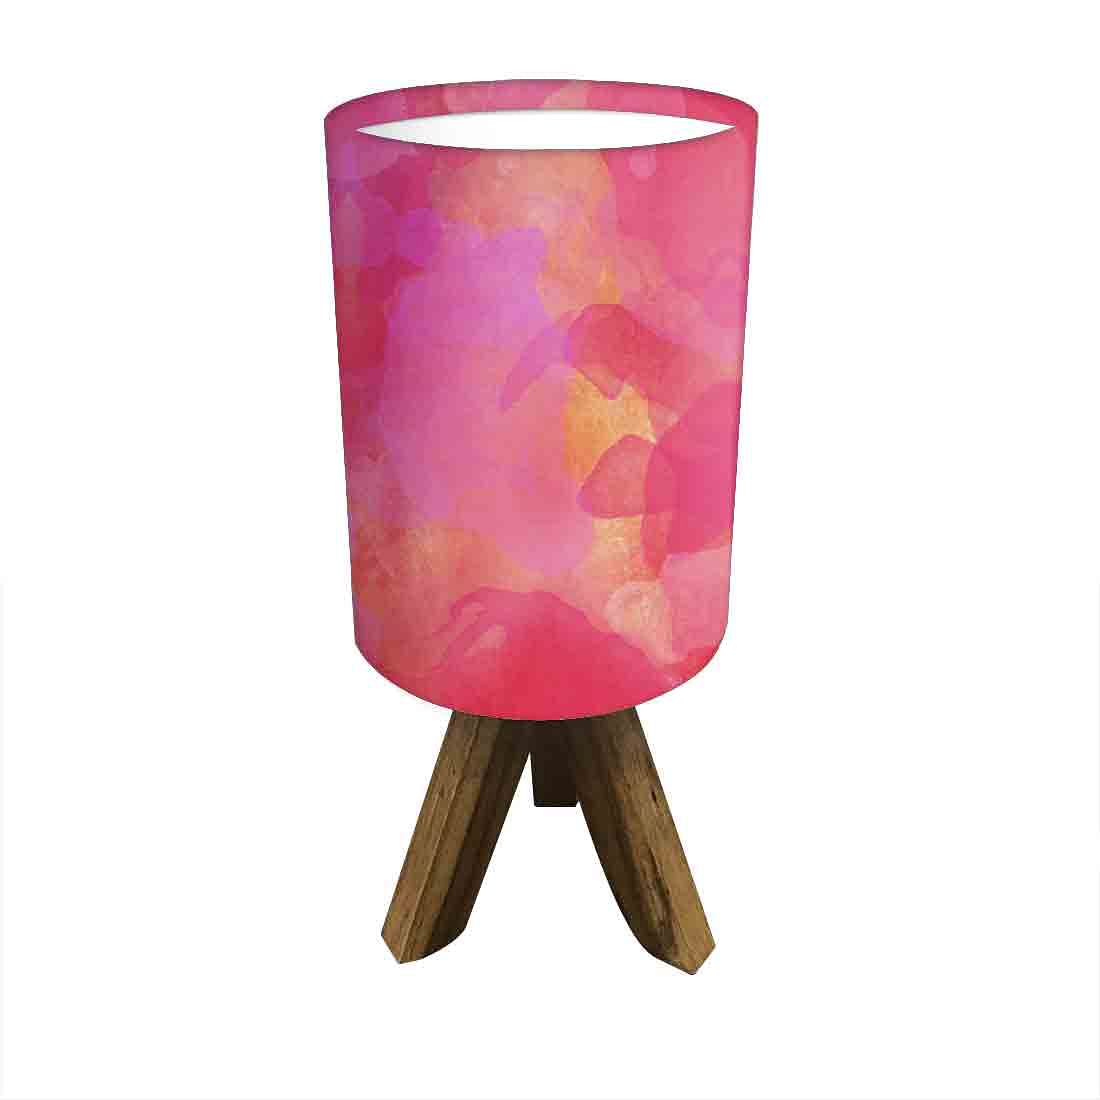 Wooden Bedside Table Lamps For Bedroom - Watercolor Pink Nutcase